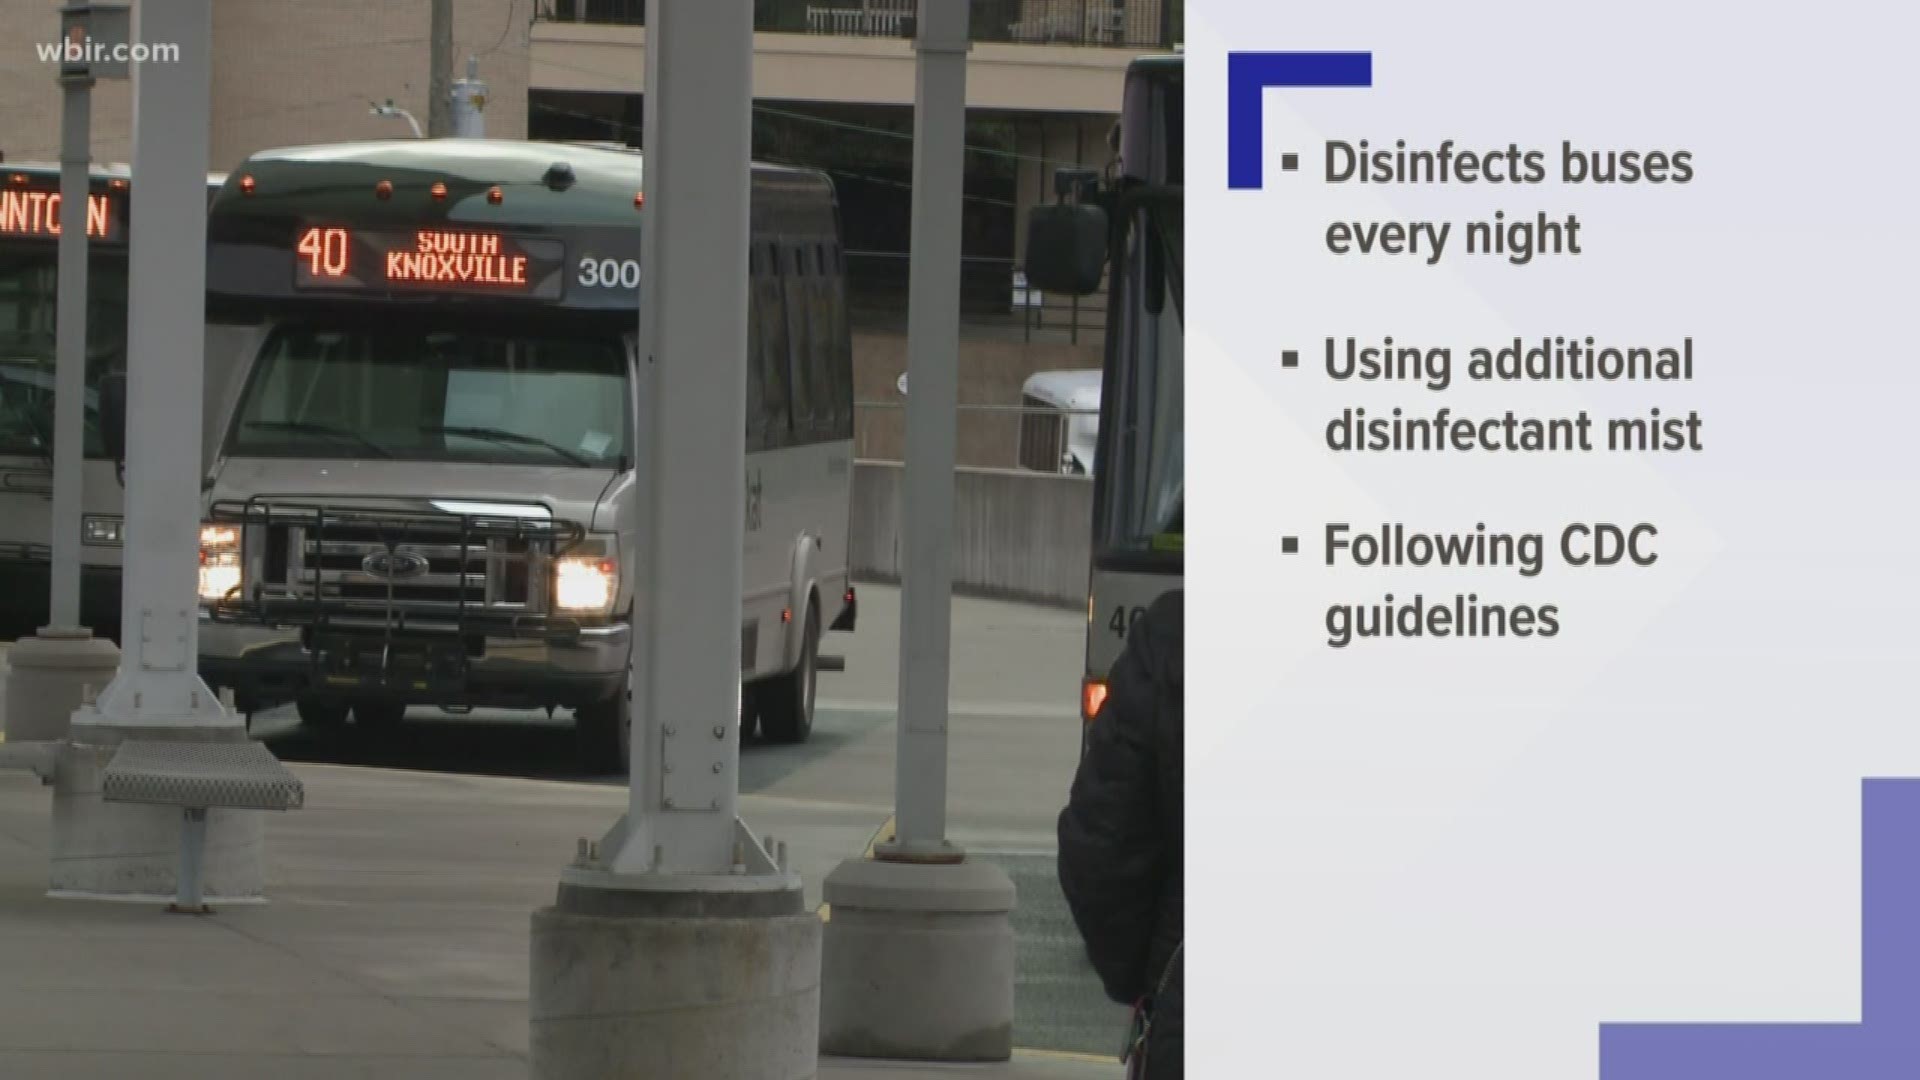 Knoxville Area Transit says its employees continue to disinfect buses every night. It's also using an additional disinfectant mist on each bus.